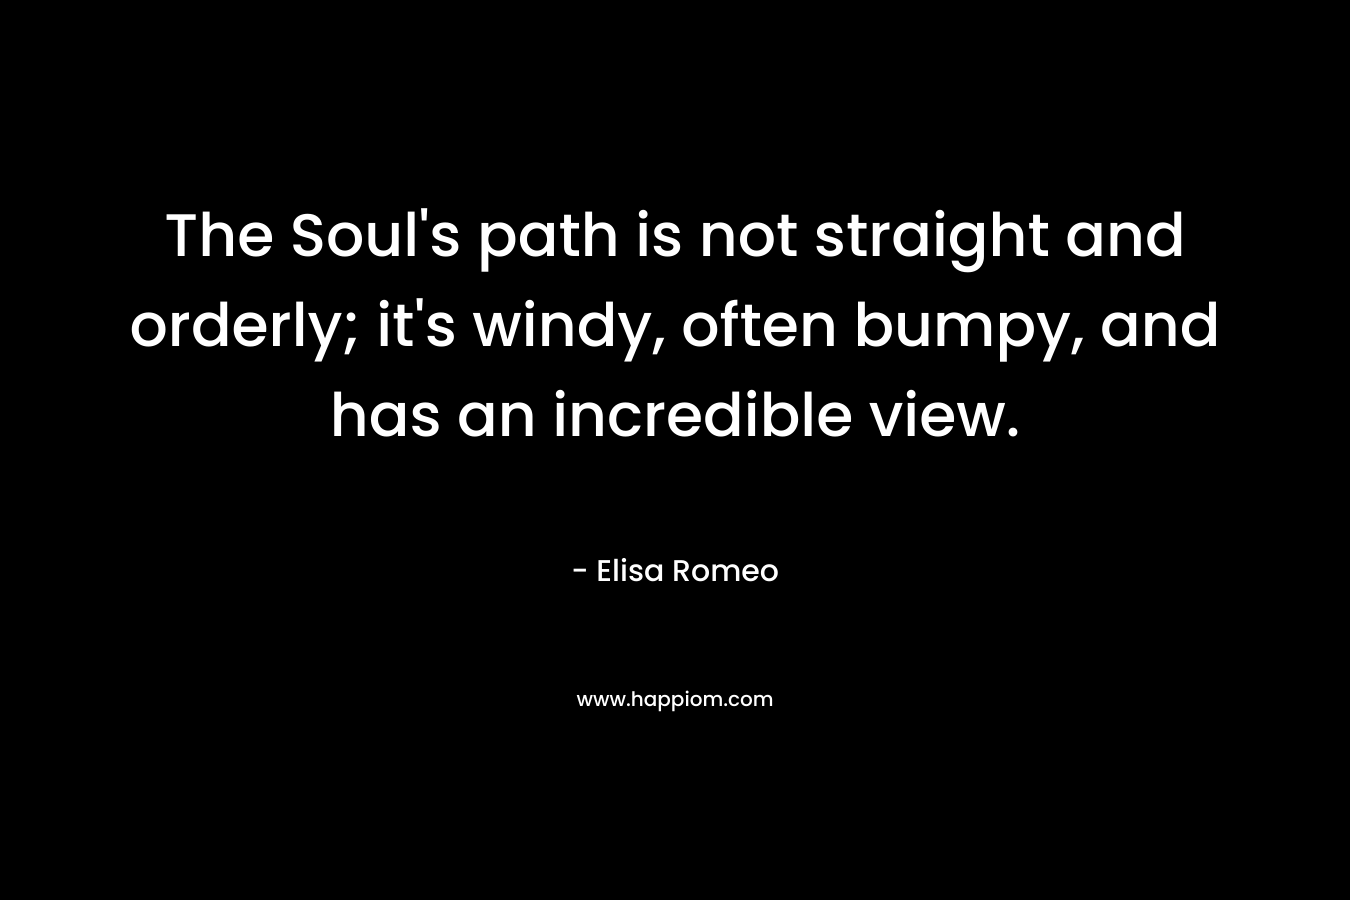 The Soul's path is not straight and orderly; it's windy, often bumpy, and has an incredible view.